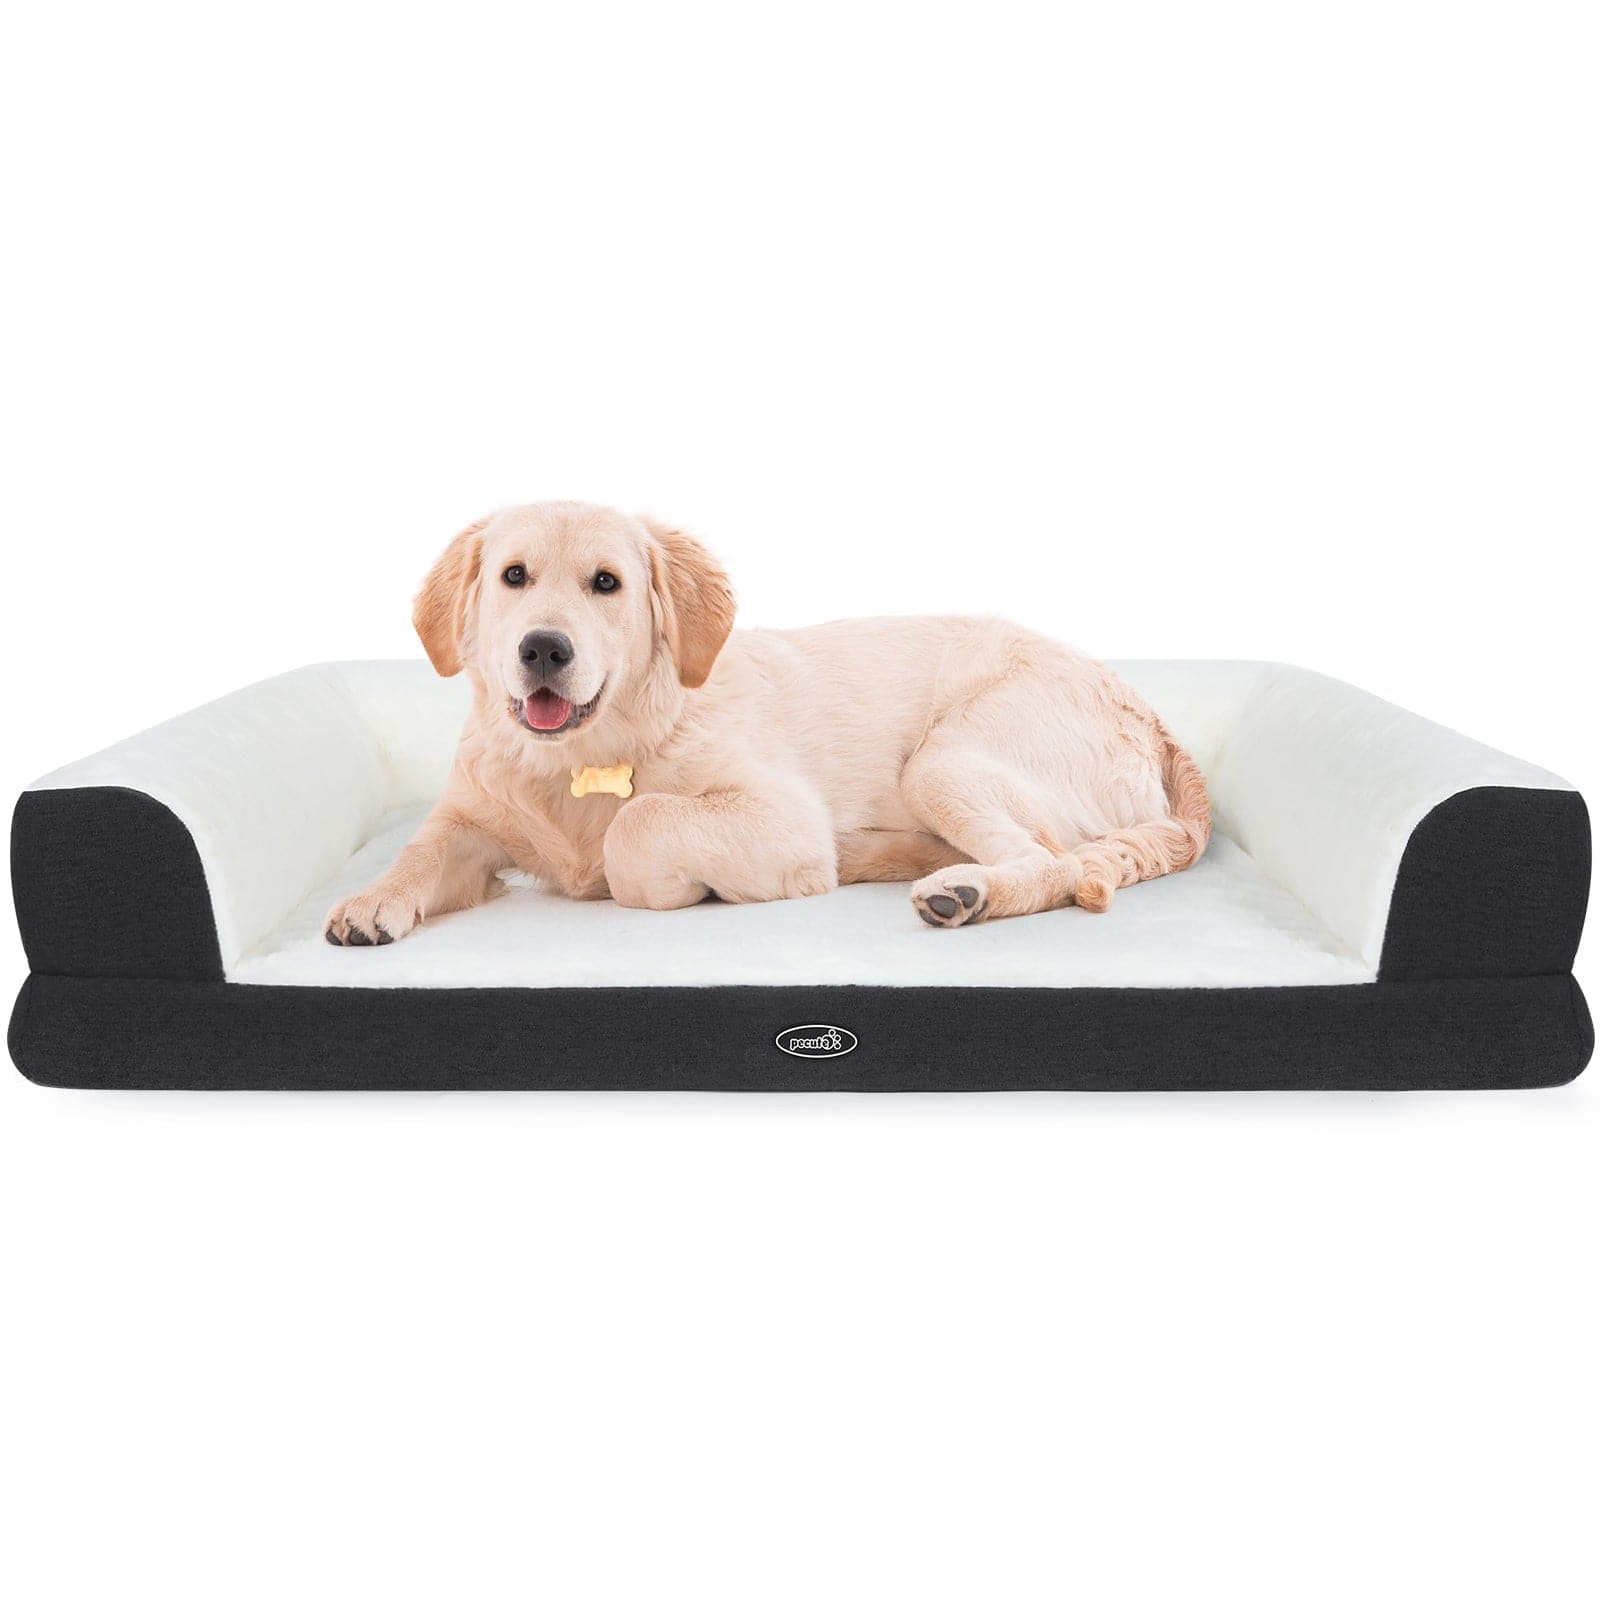 Pecute Dog Bed for Dogs Orthopedic (M).